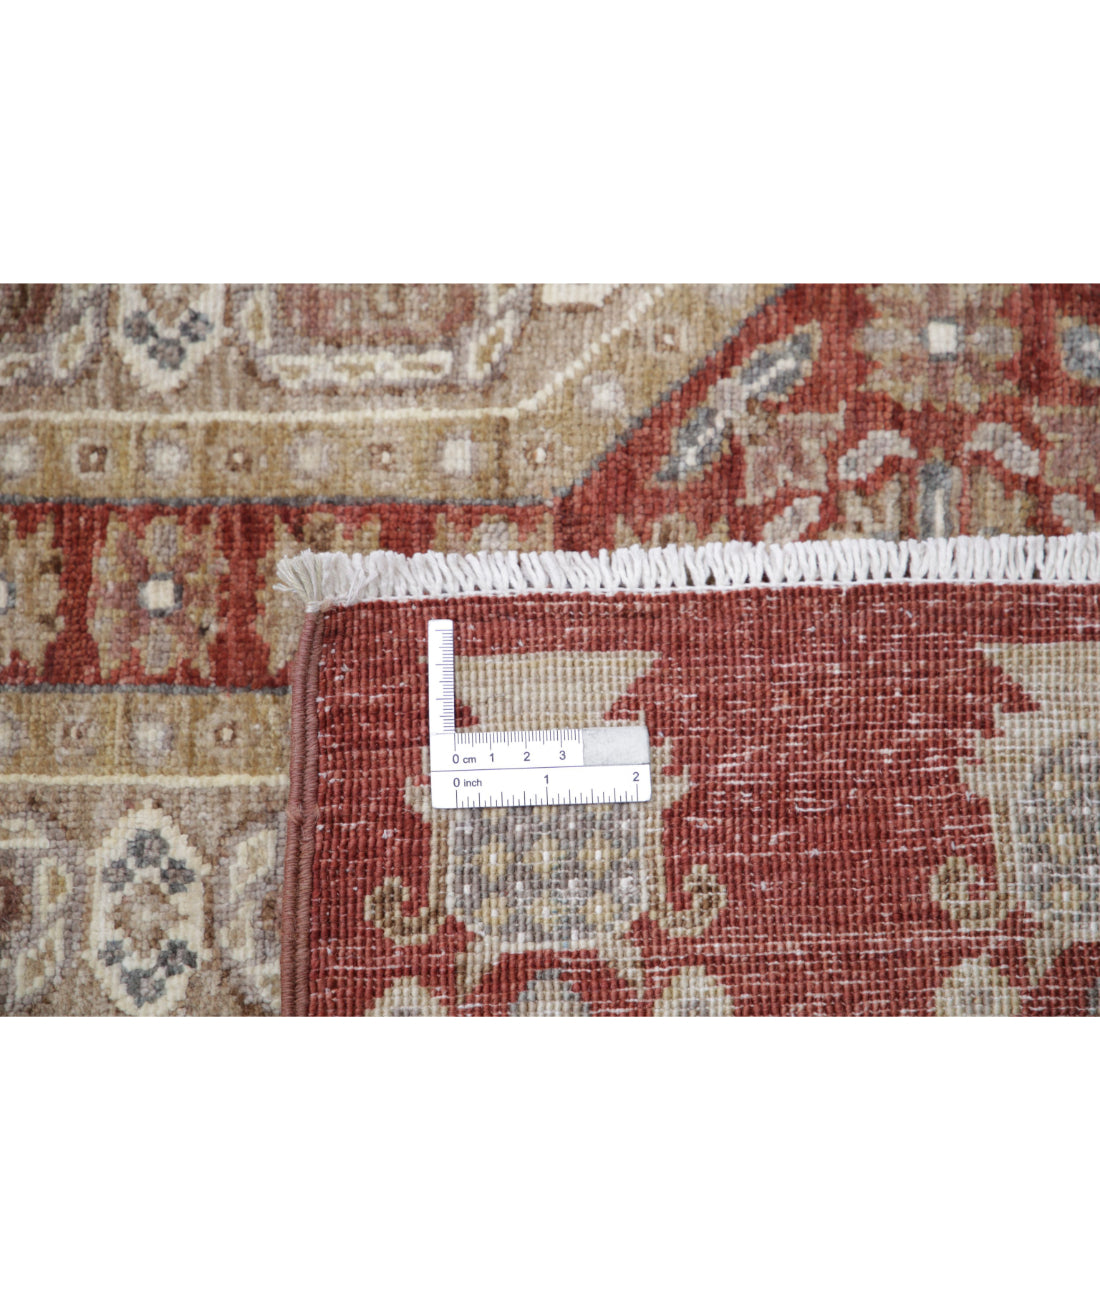 Ziegler 9'9'' X 13'4'' Hand-Knotted Wool Rug 9'9'' x 13'4'' (293 X 400) / Rust / Taupe